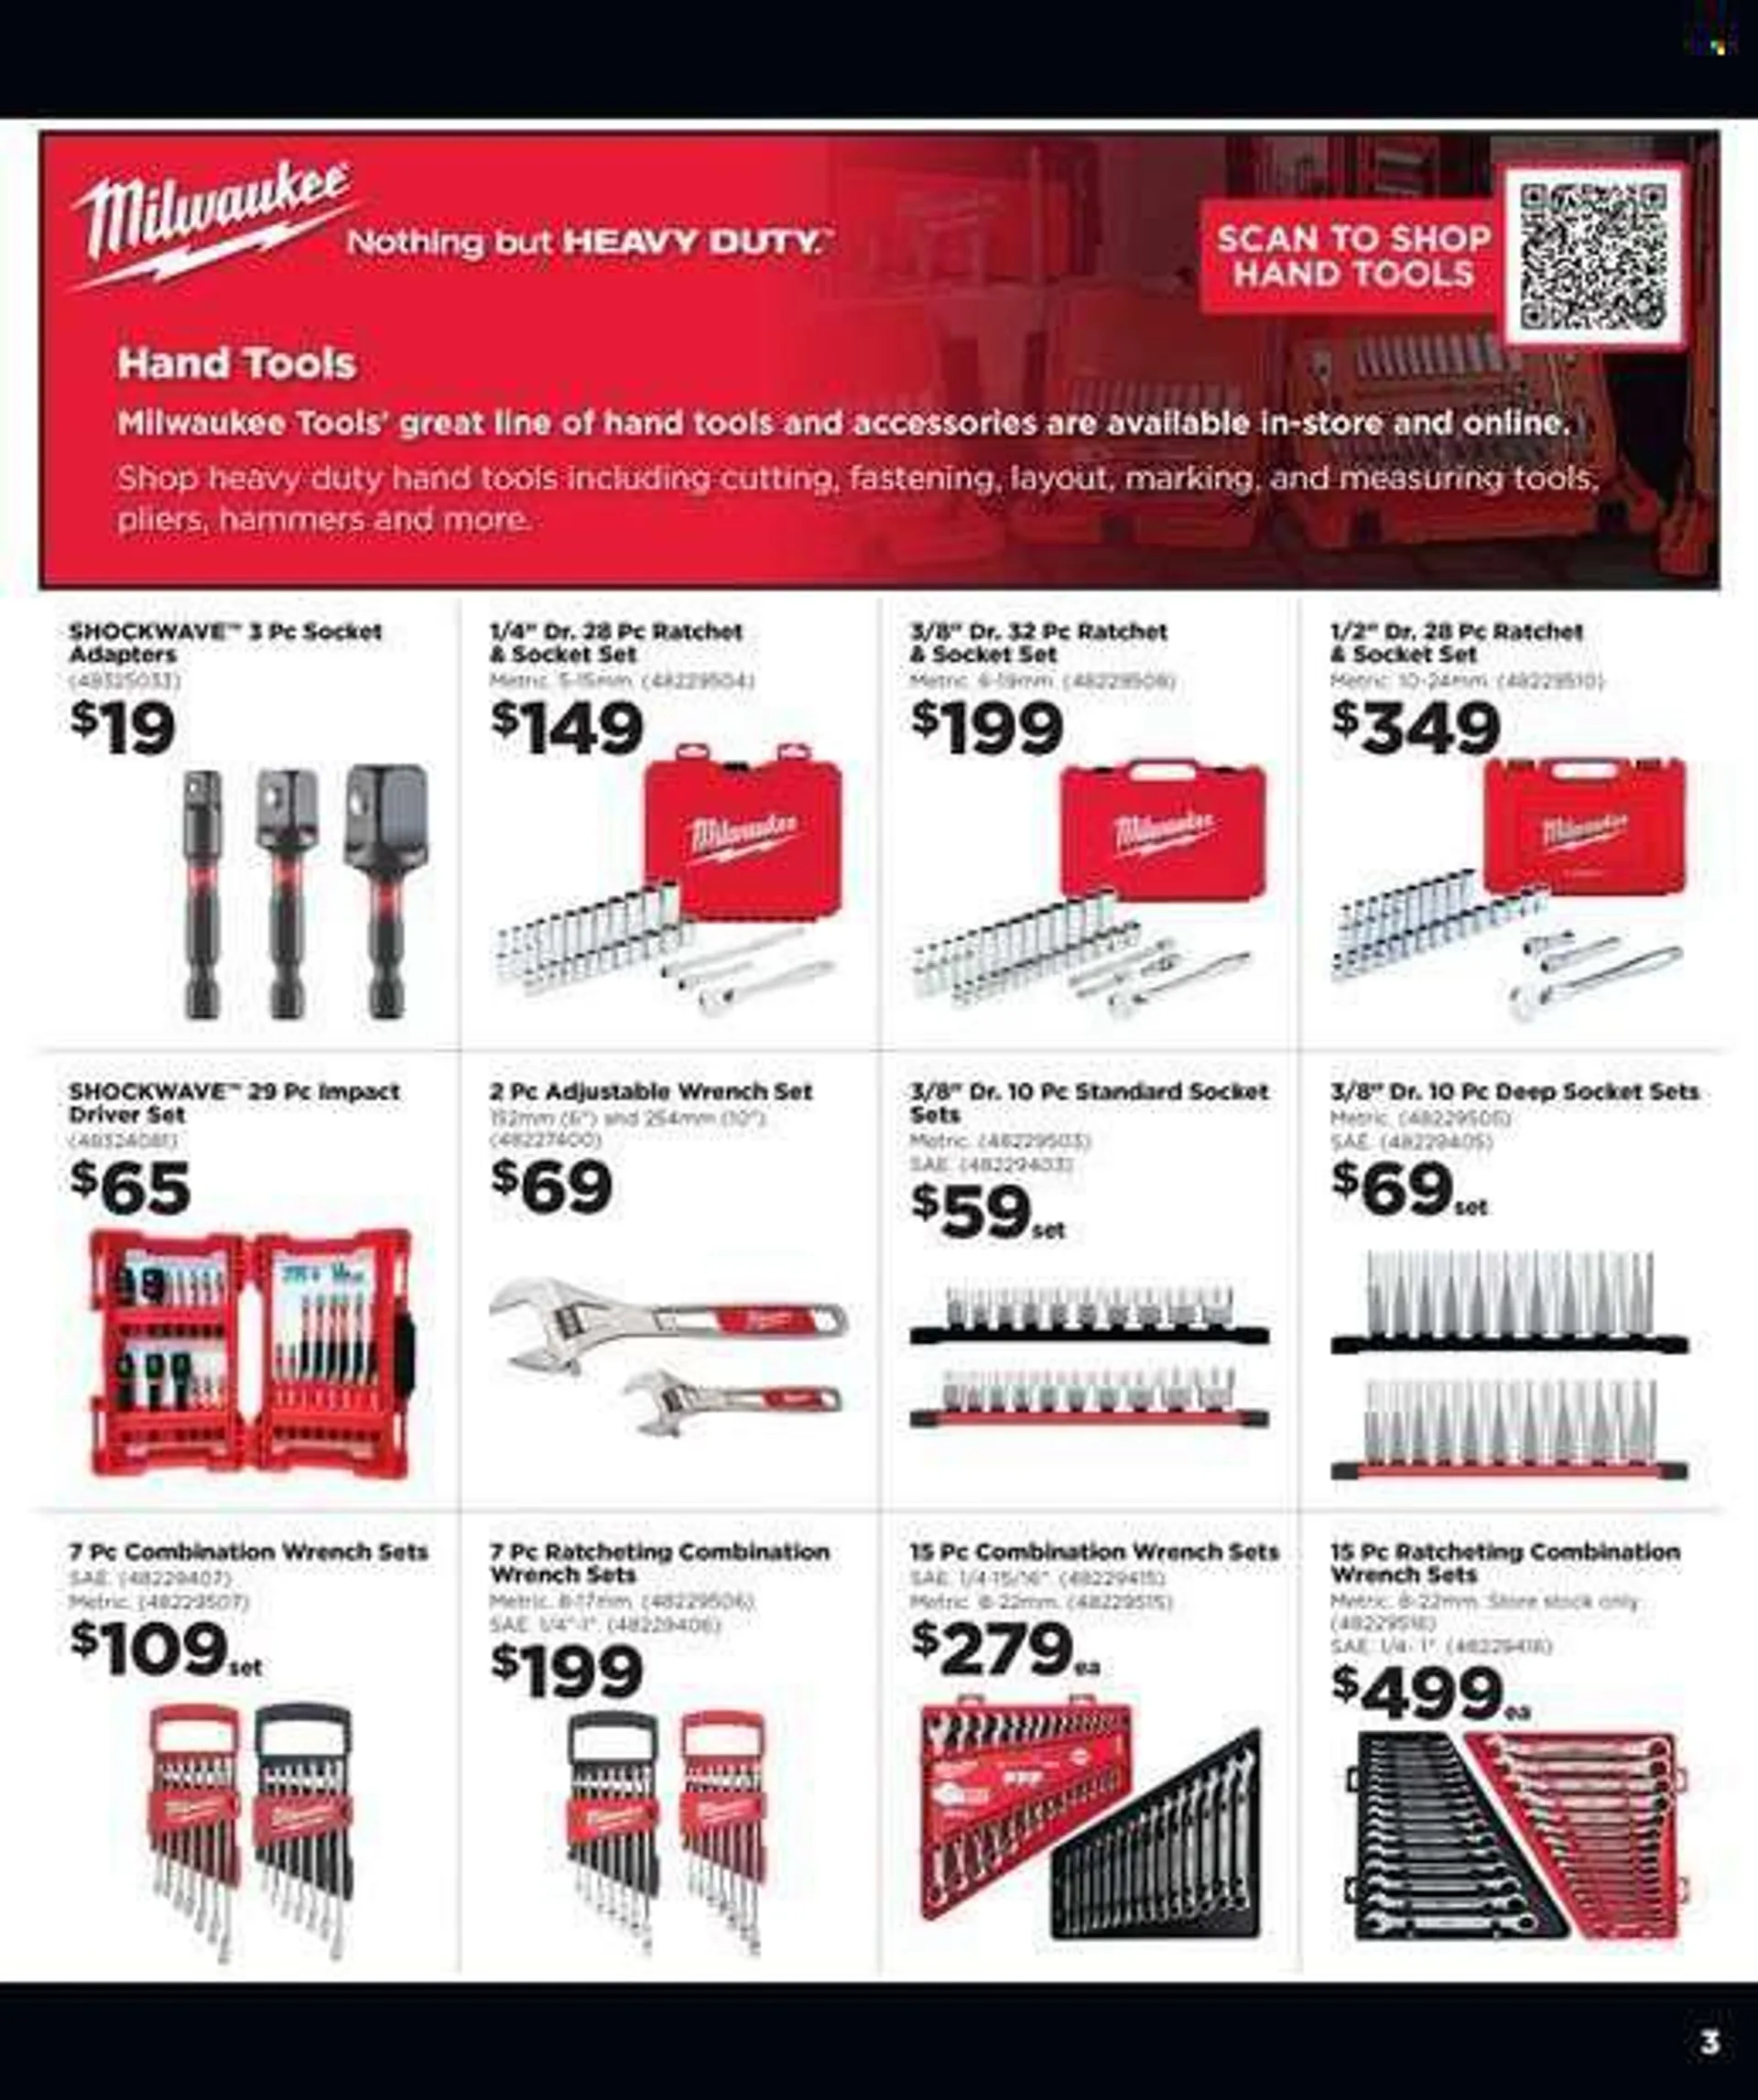 Repco mailer - 01.06.2022 - 14.06.2022. - 1 June 14 June 2022 - Page 3